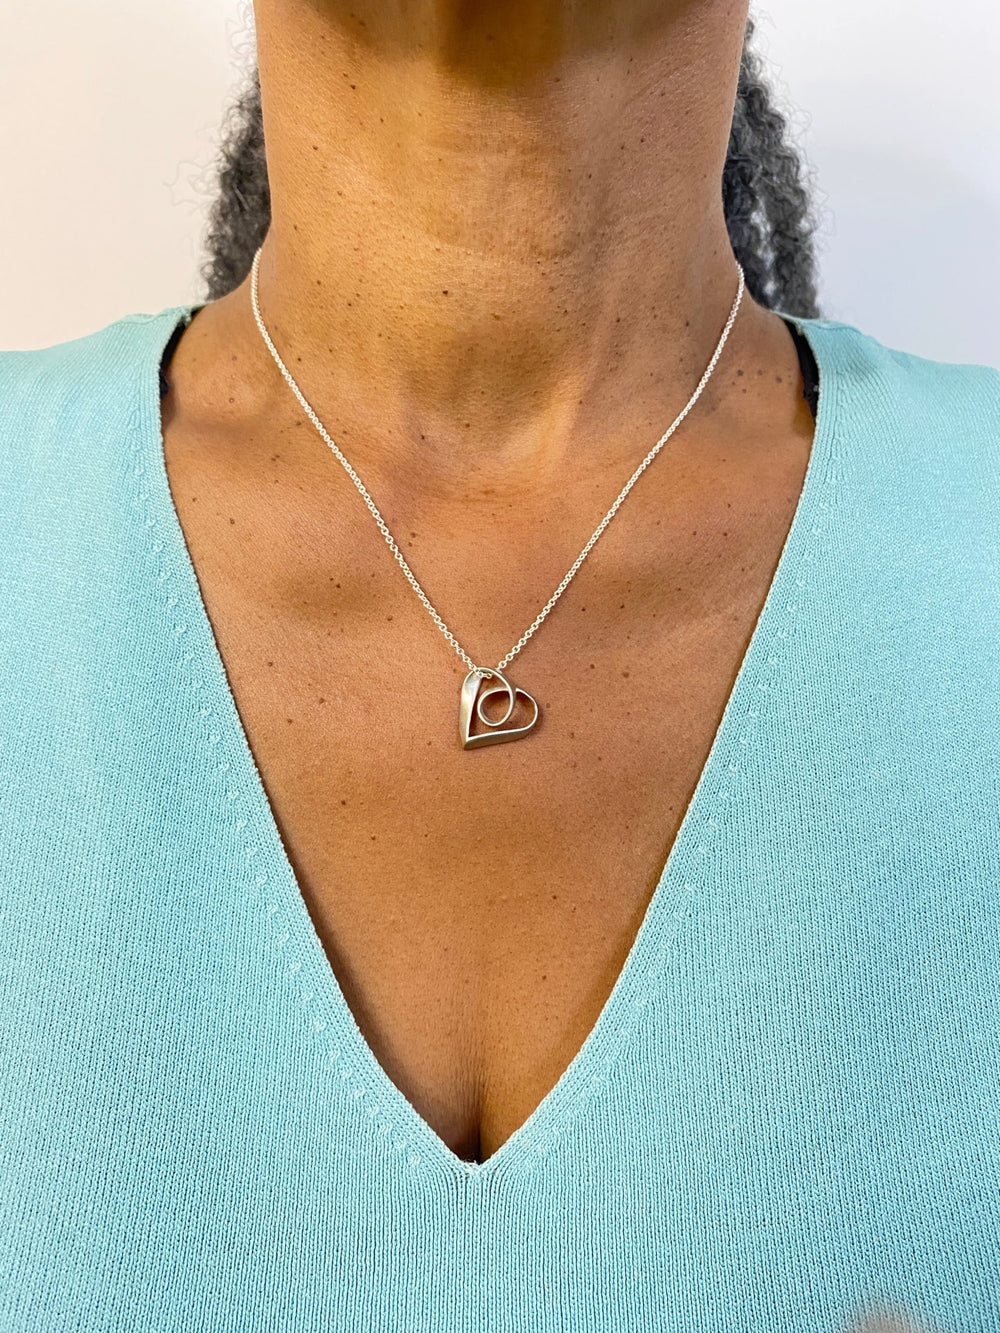 Woman wearing Sue Beatrice’s Möbius Heart: Timeless Symbol of Love in Sterling Silver